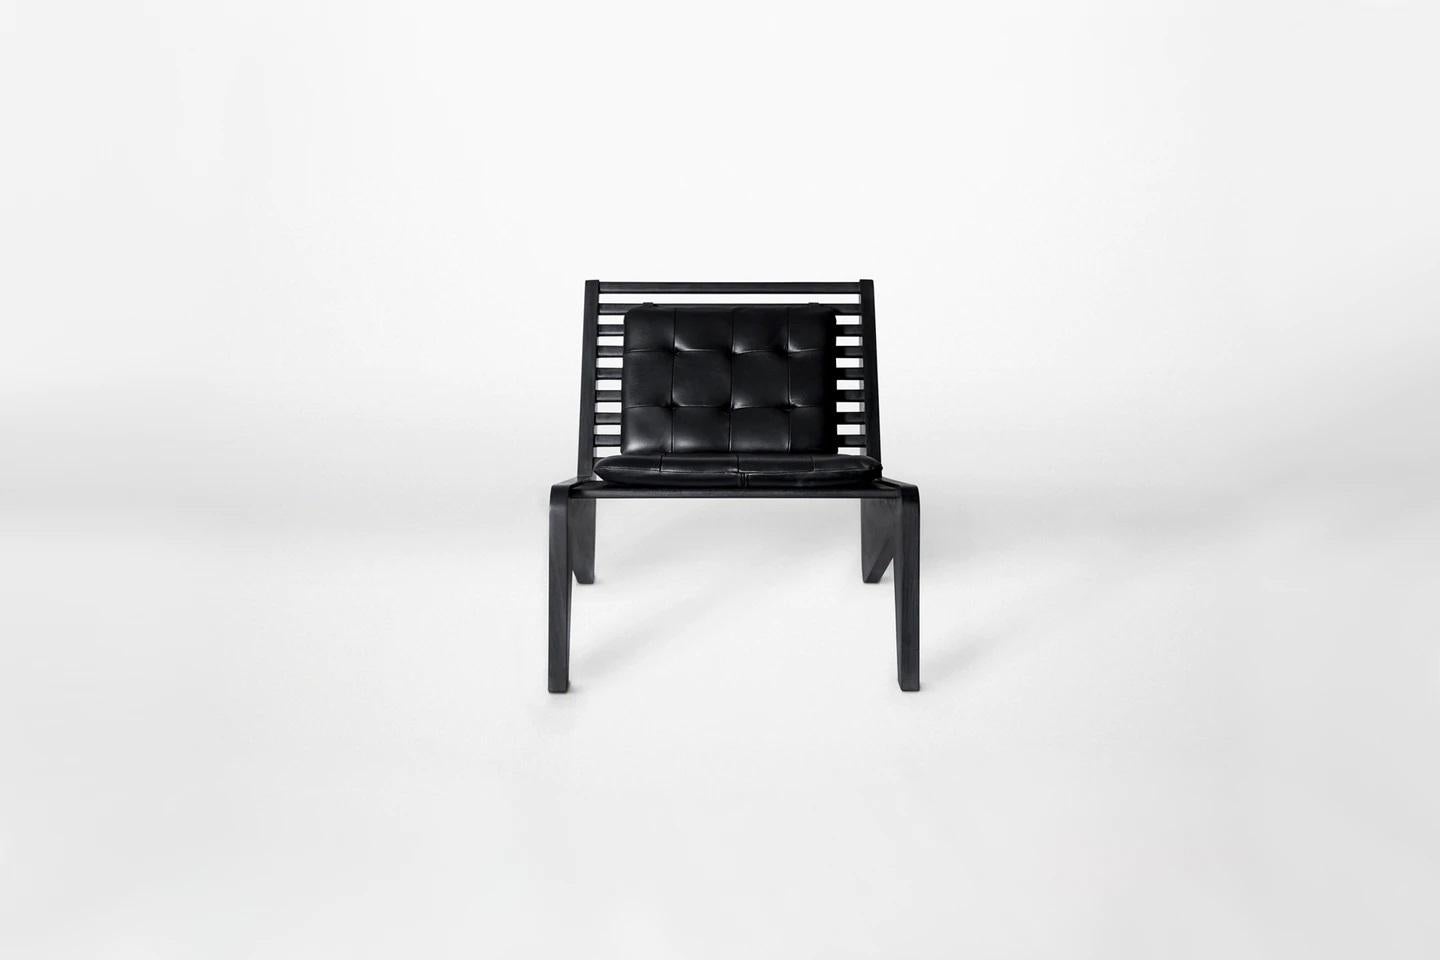 Mexican Black Ala Lounge Chair by Atra Design